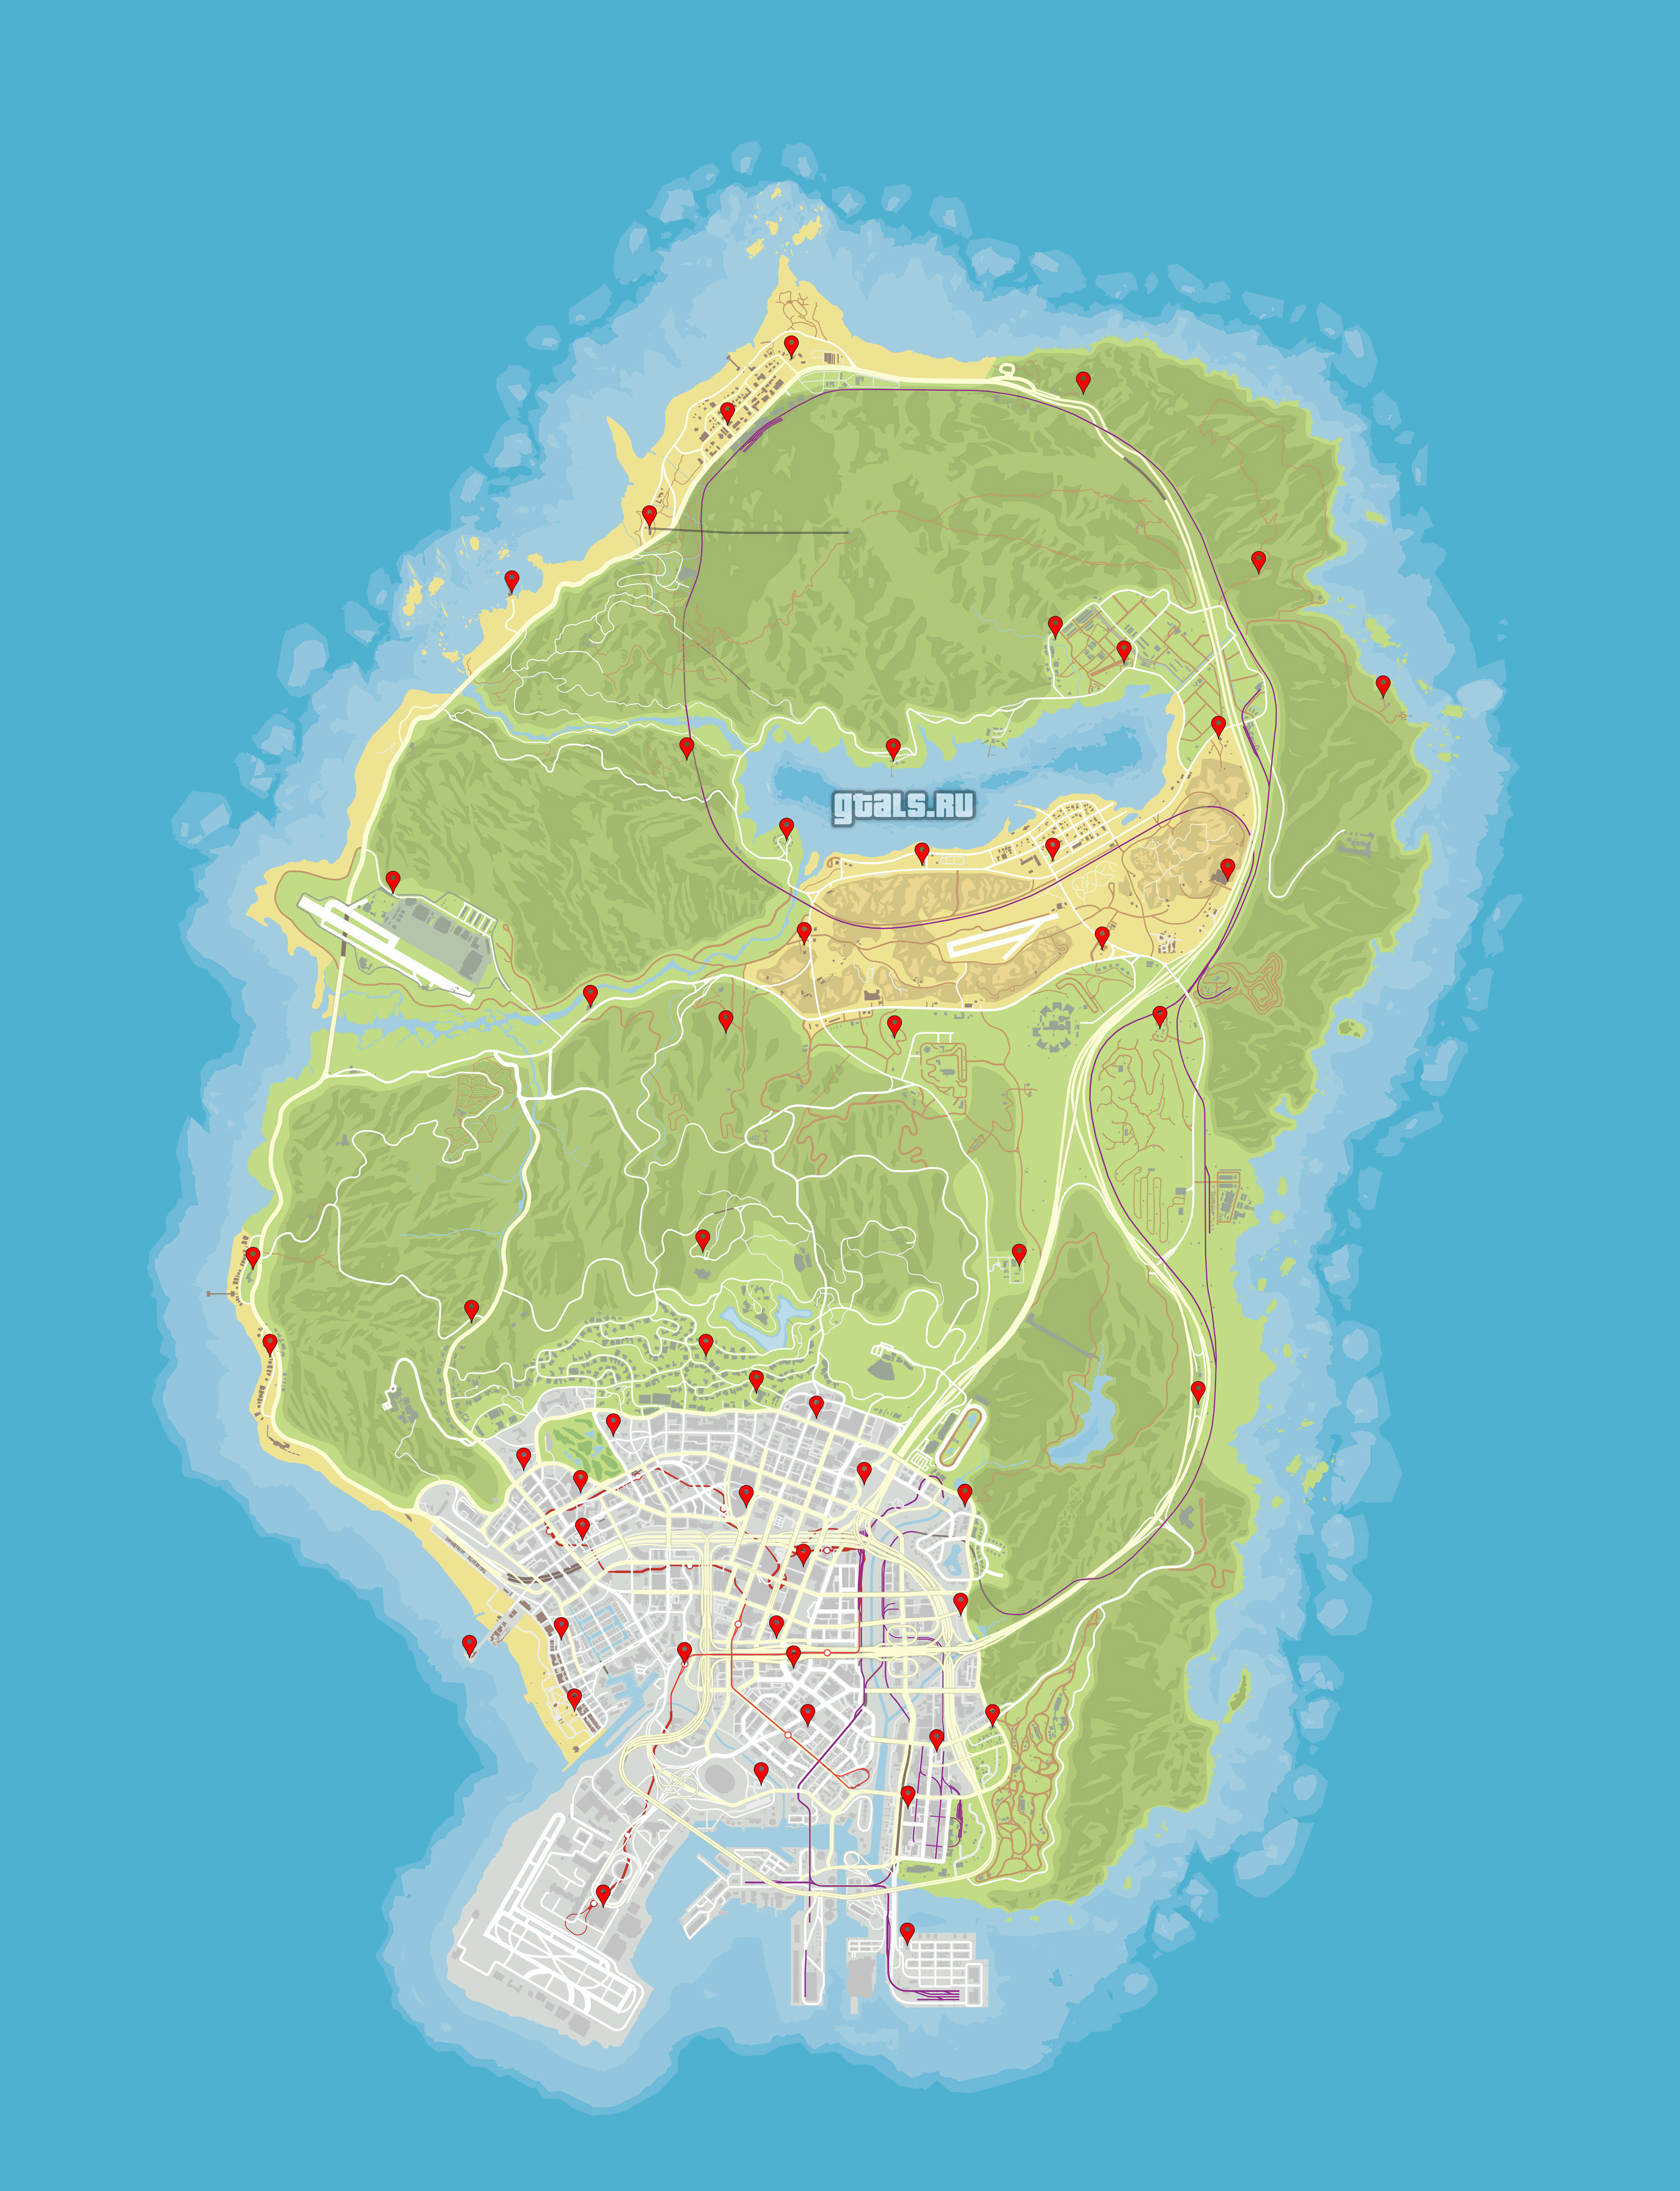 Gta 5 map with street names фото 97